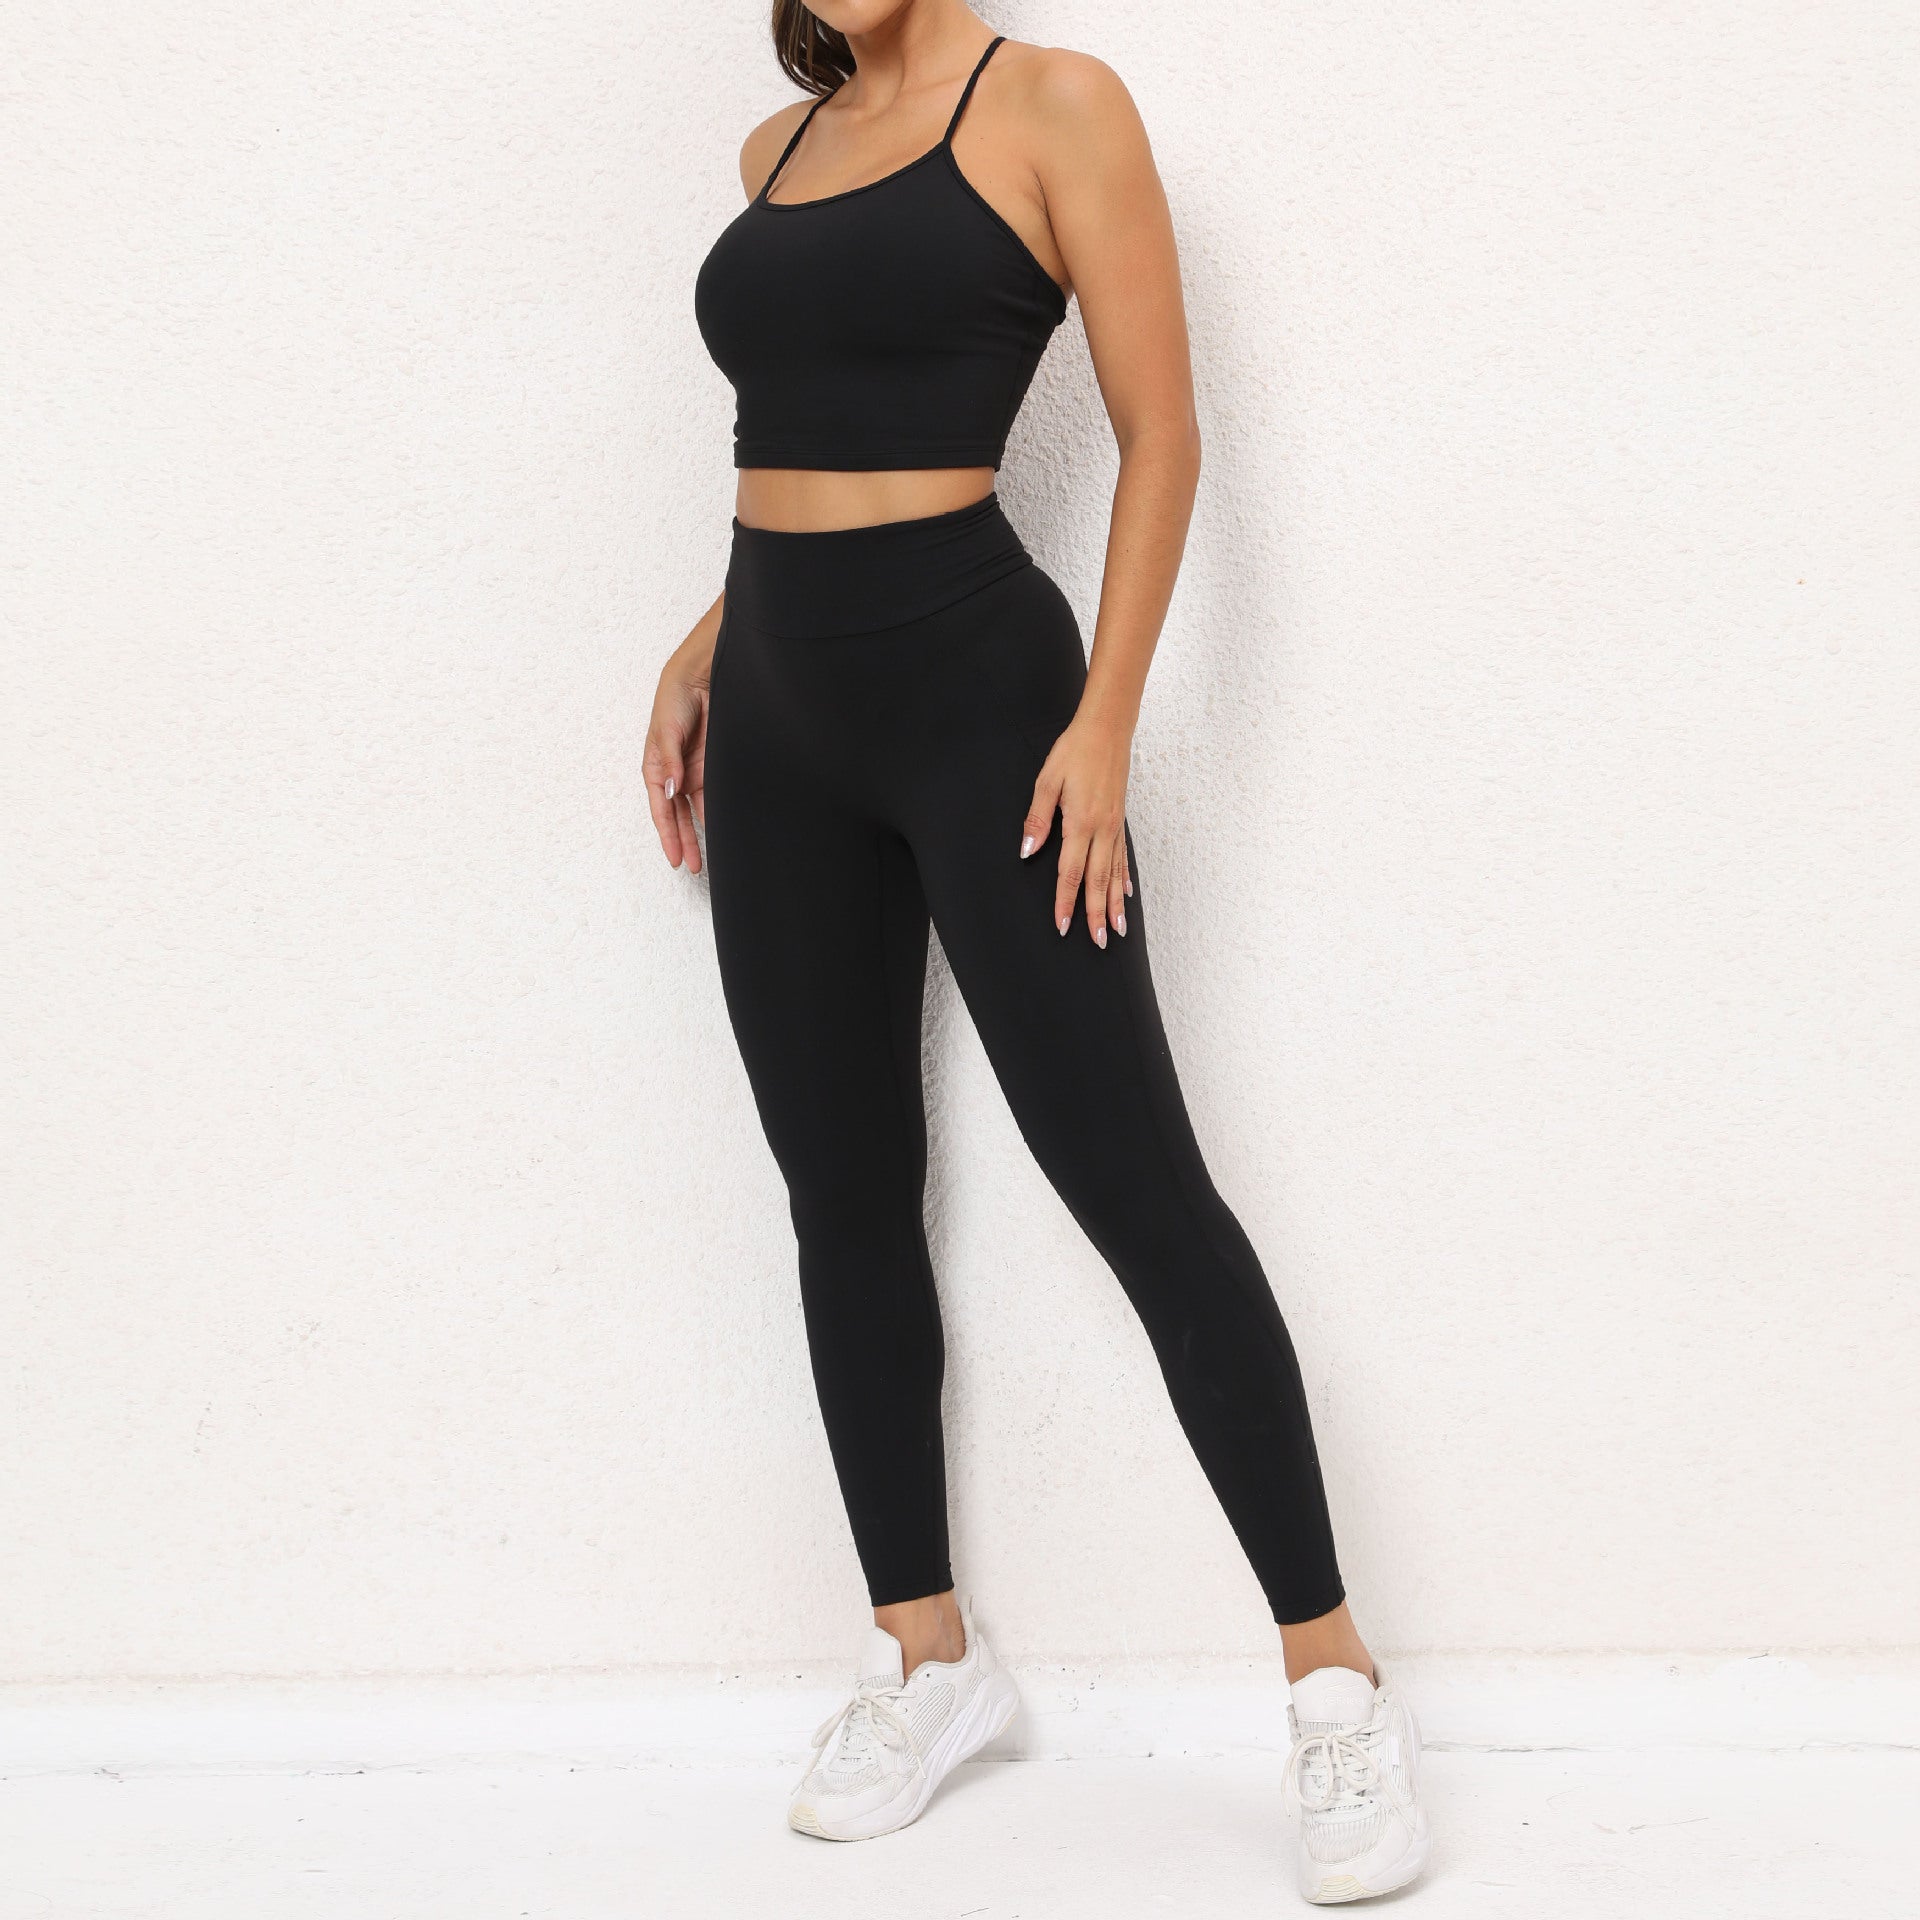 Sexy High Waist Yoga Suits for Women-Activewear-Black-S-Free Shipping at meselling99